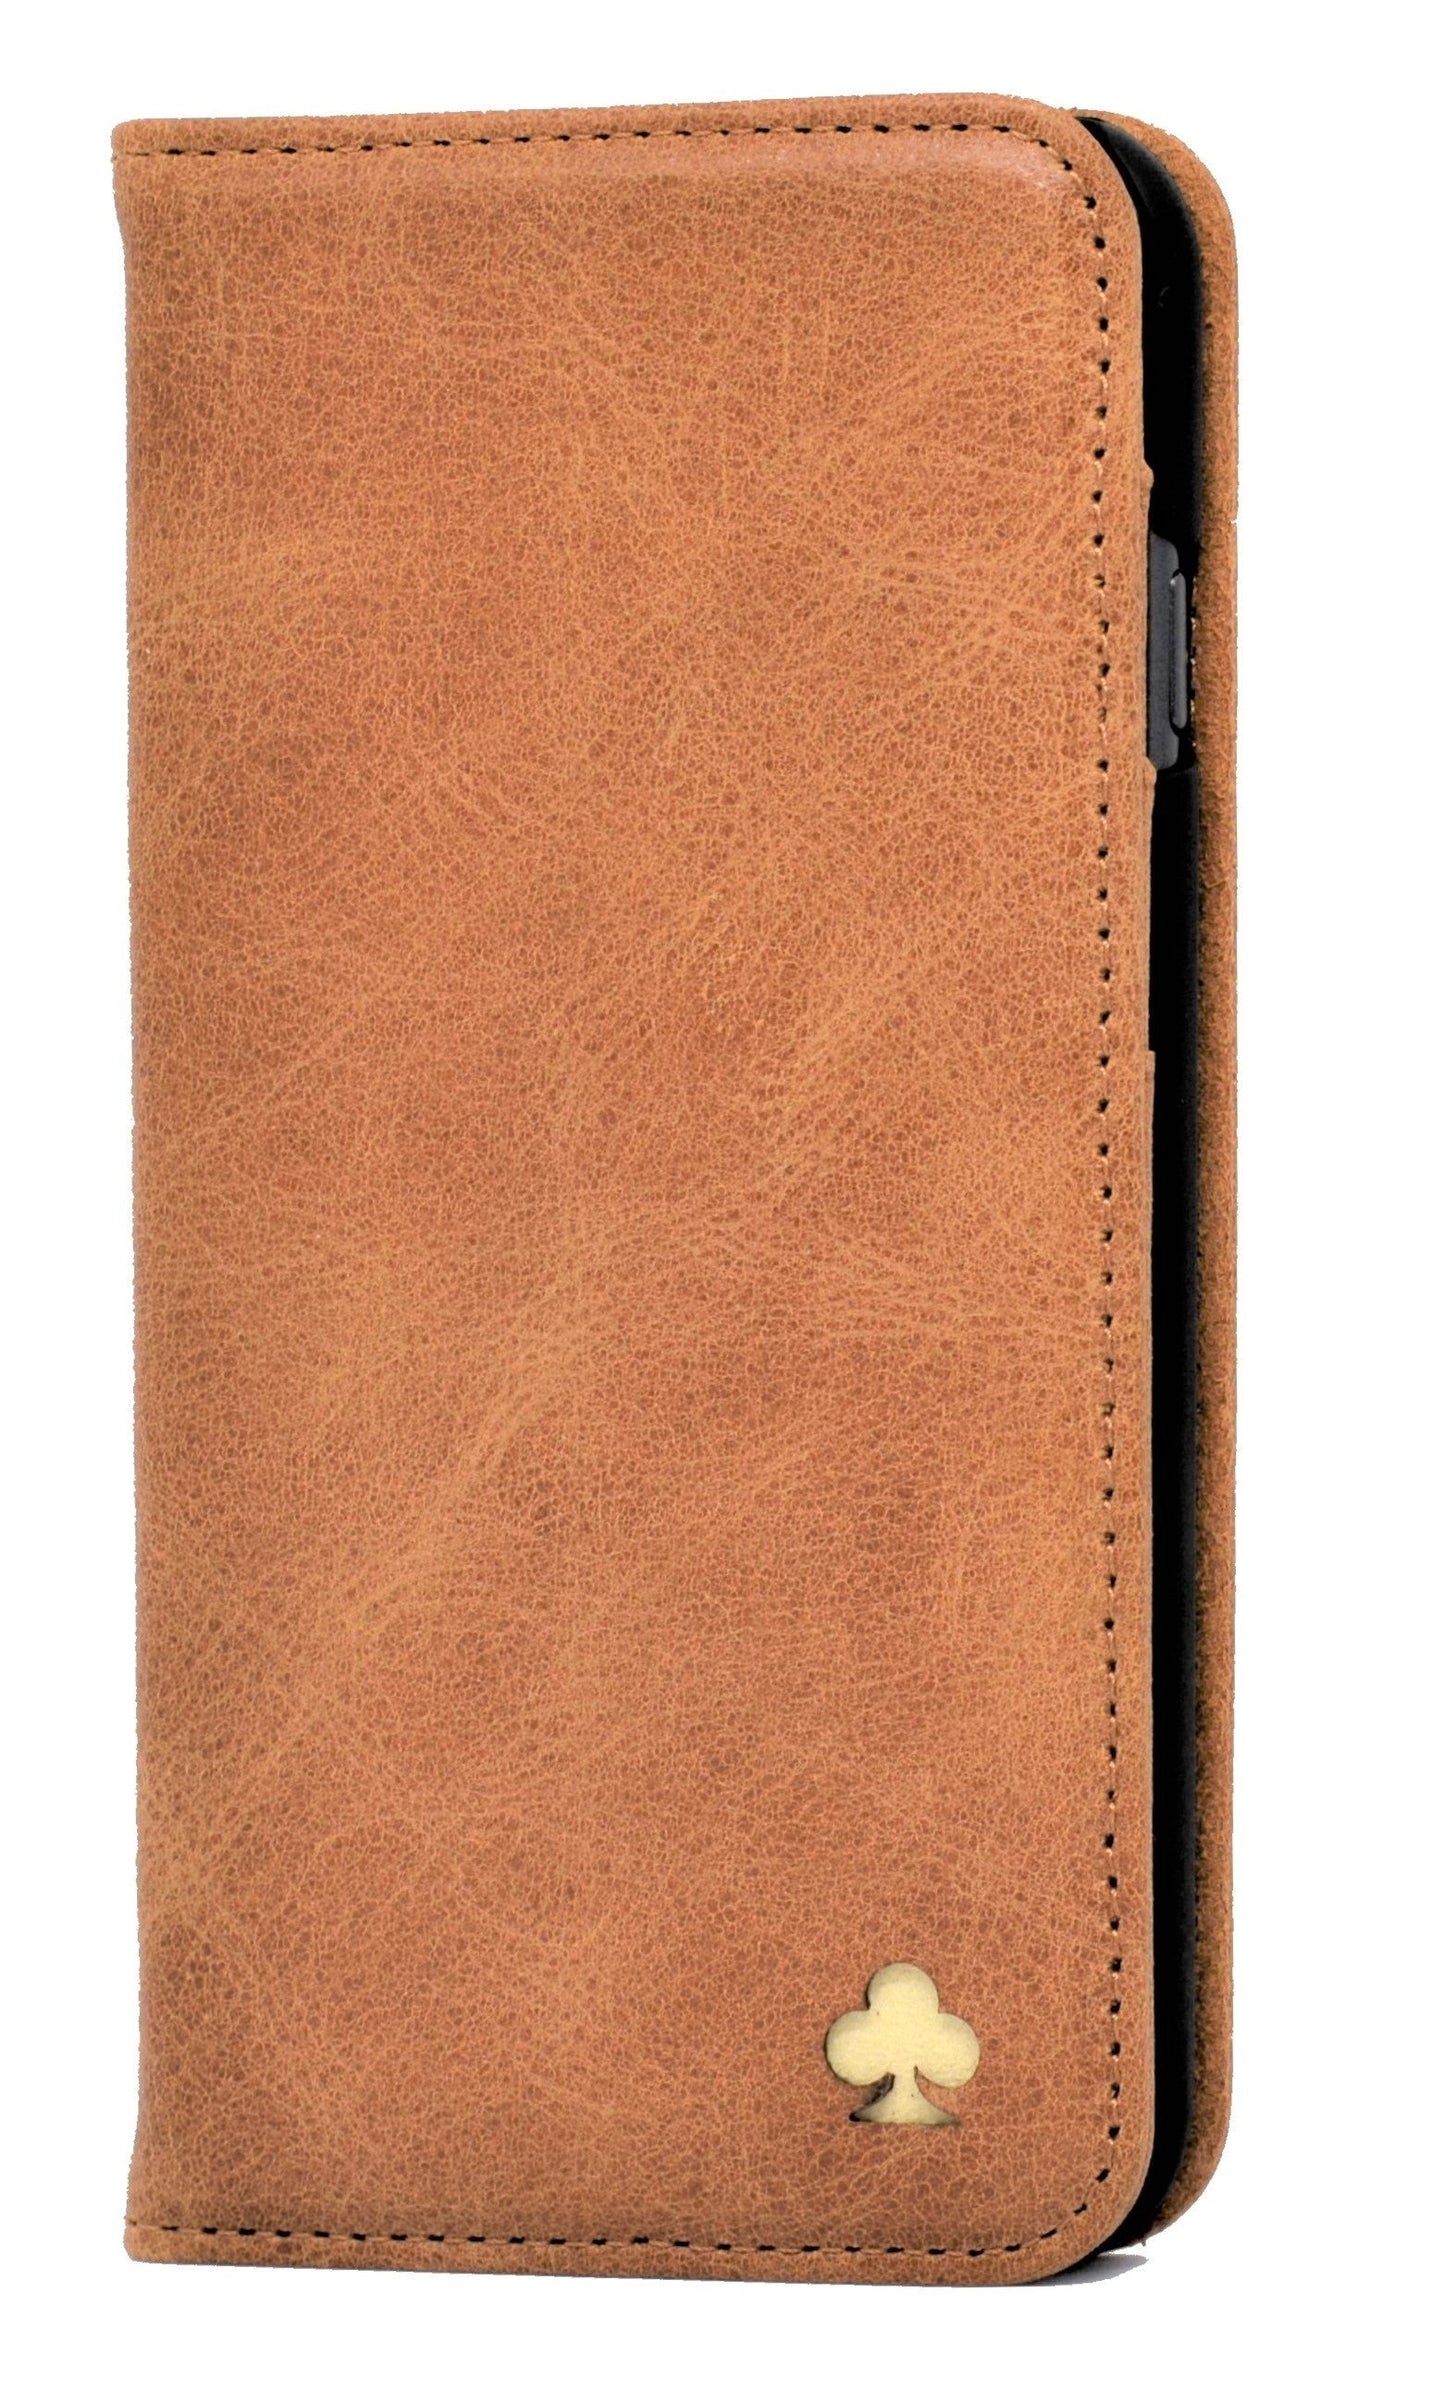 Samsung Galaxy S23 Leather Case. Premium Slim Genuine Leather Stand Case/Cover/Wallet (Tan)